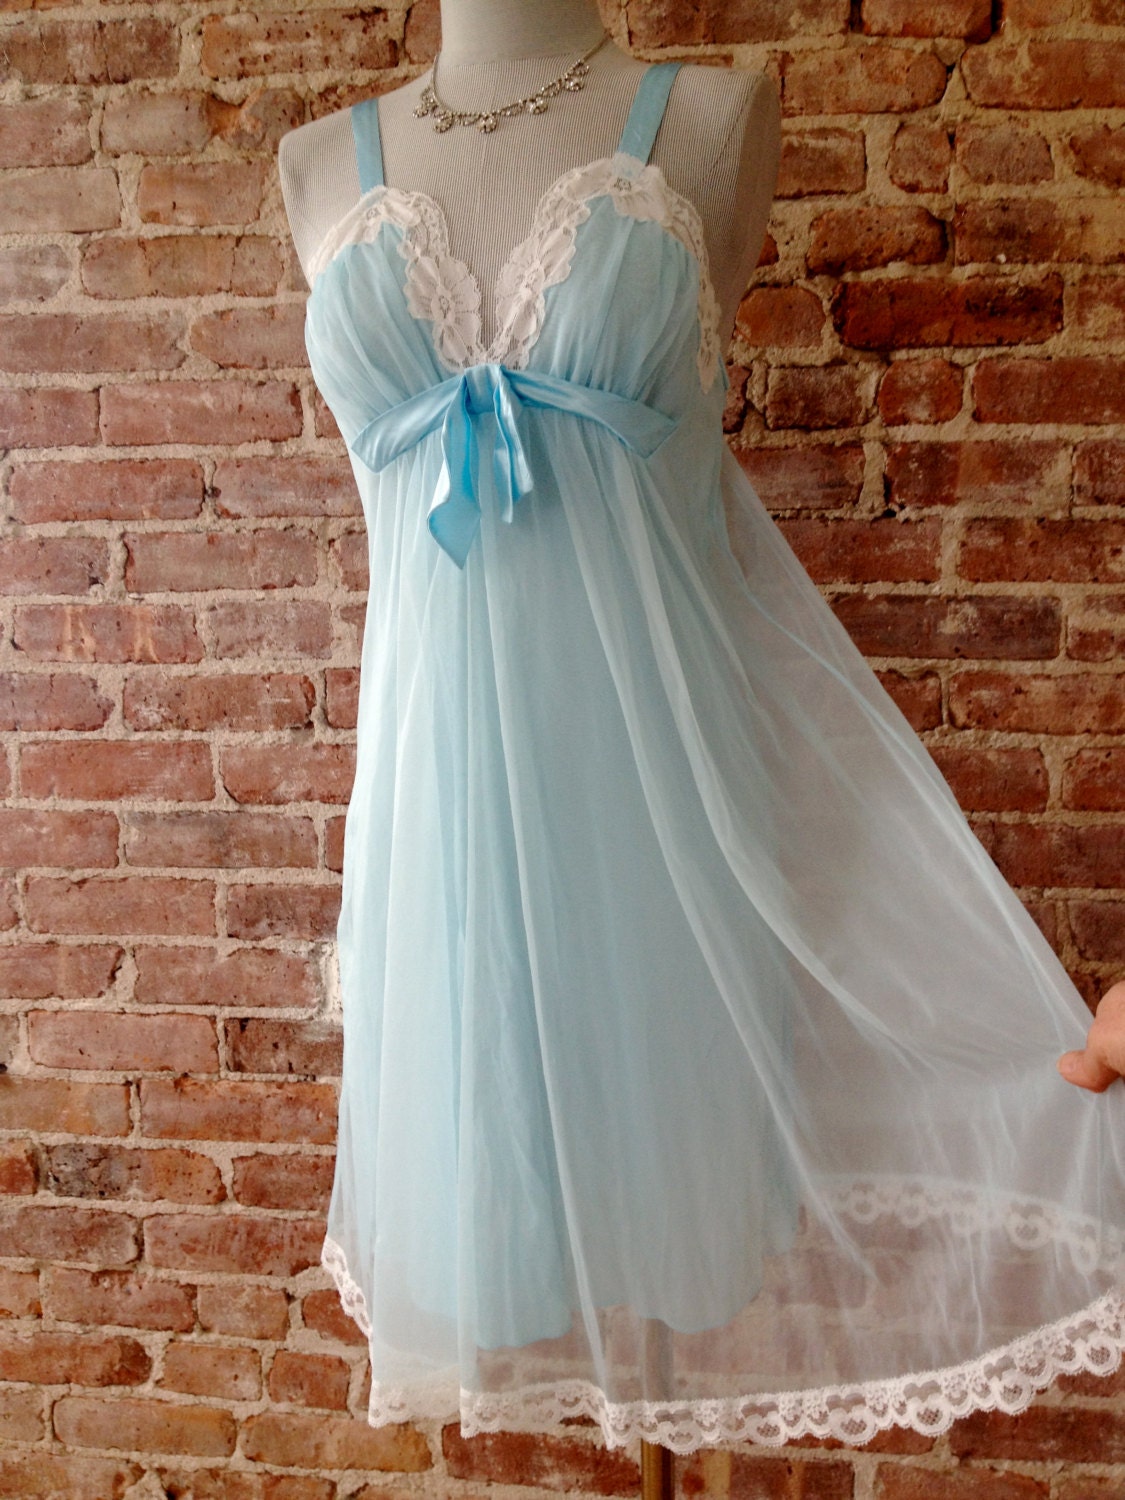 Size 32 - KAYSER Vintage Nightgown - 1950s Nightie - Lace Baby Doll - Mad Men - Something Blue